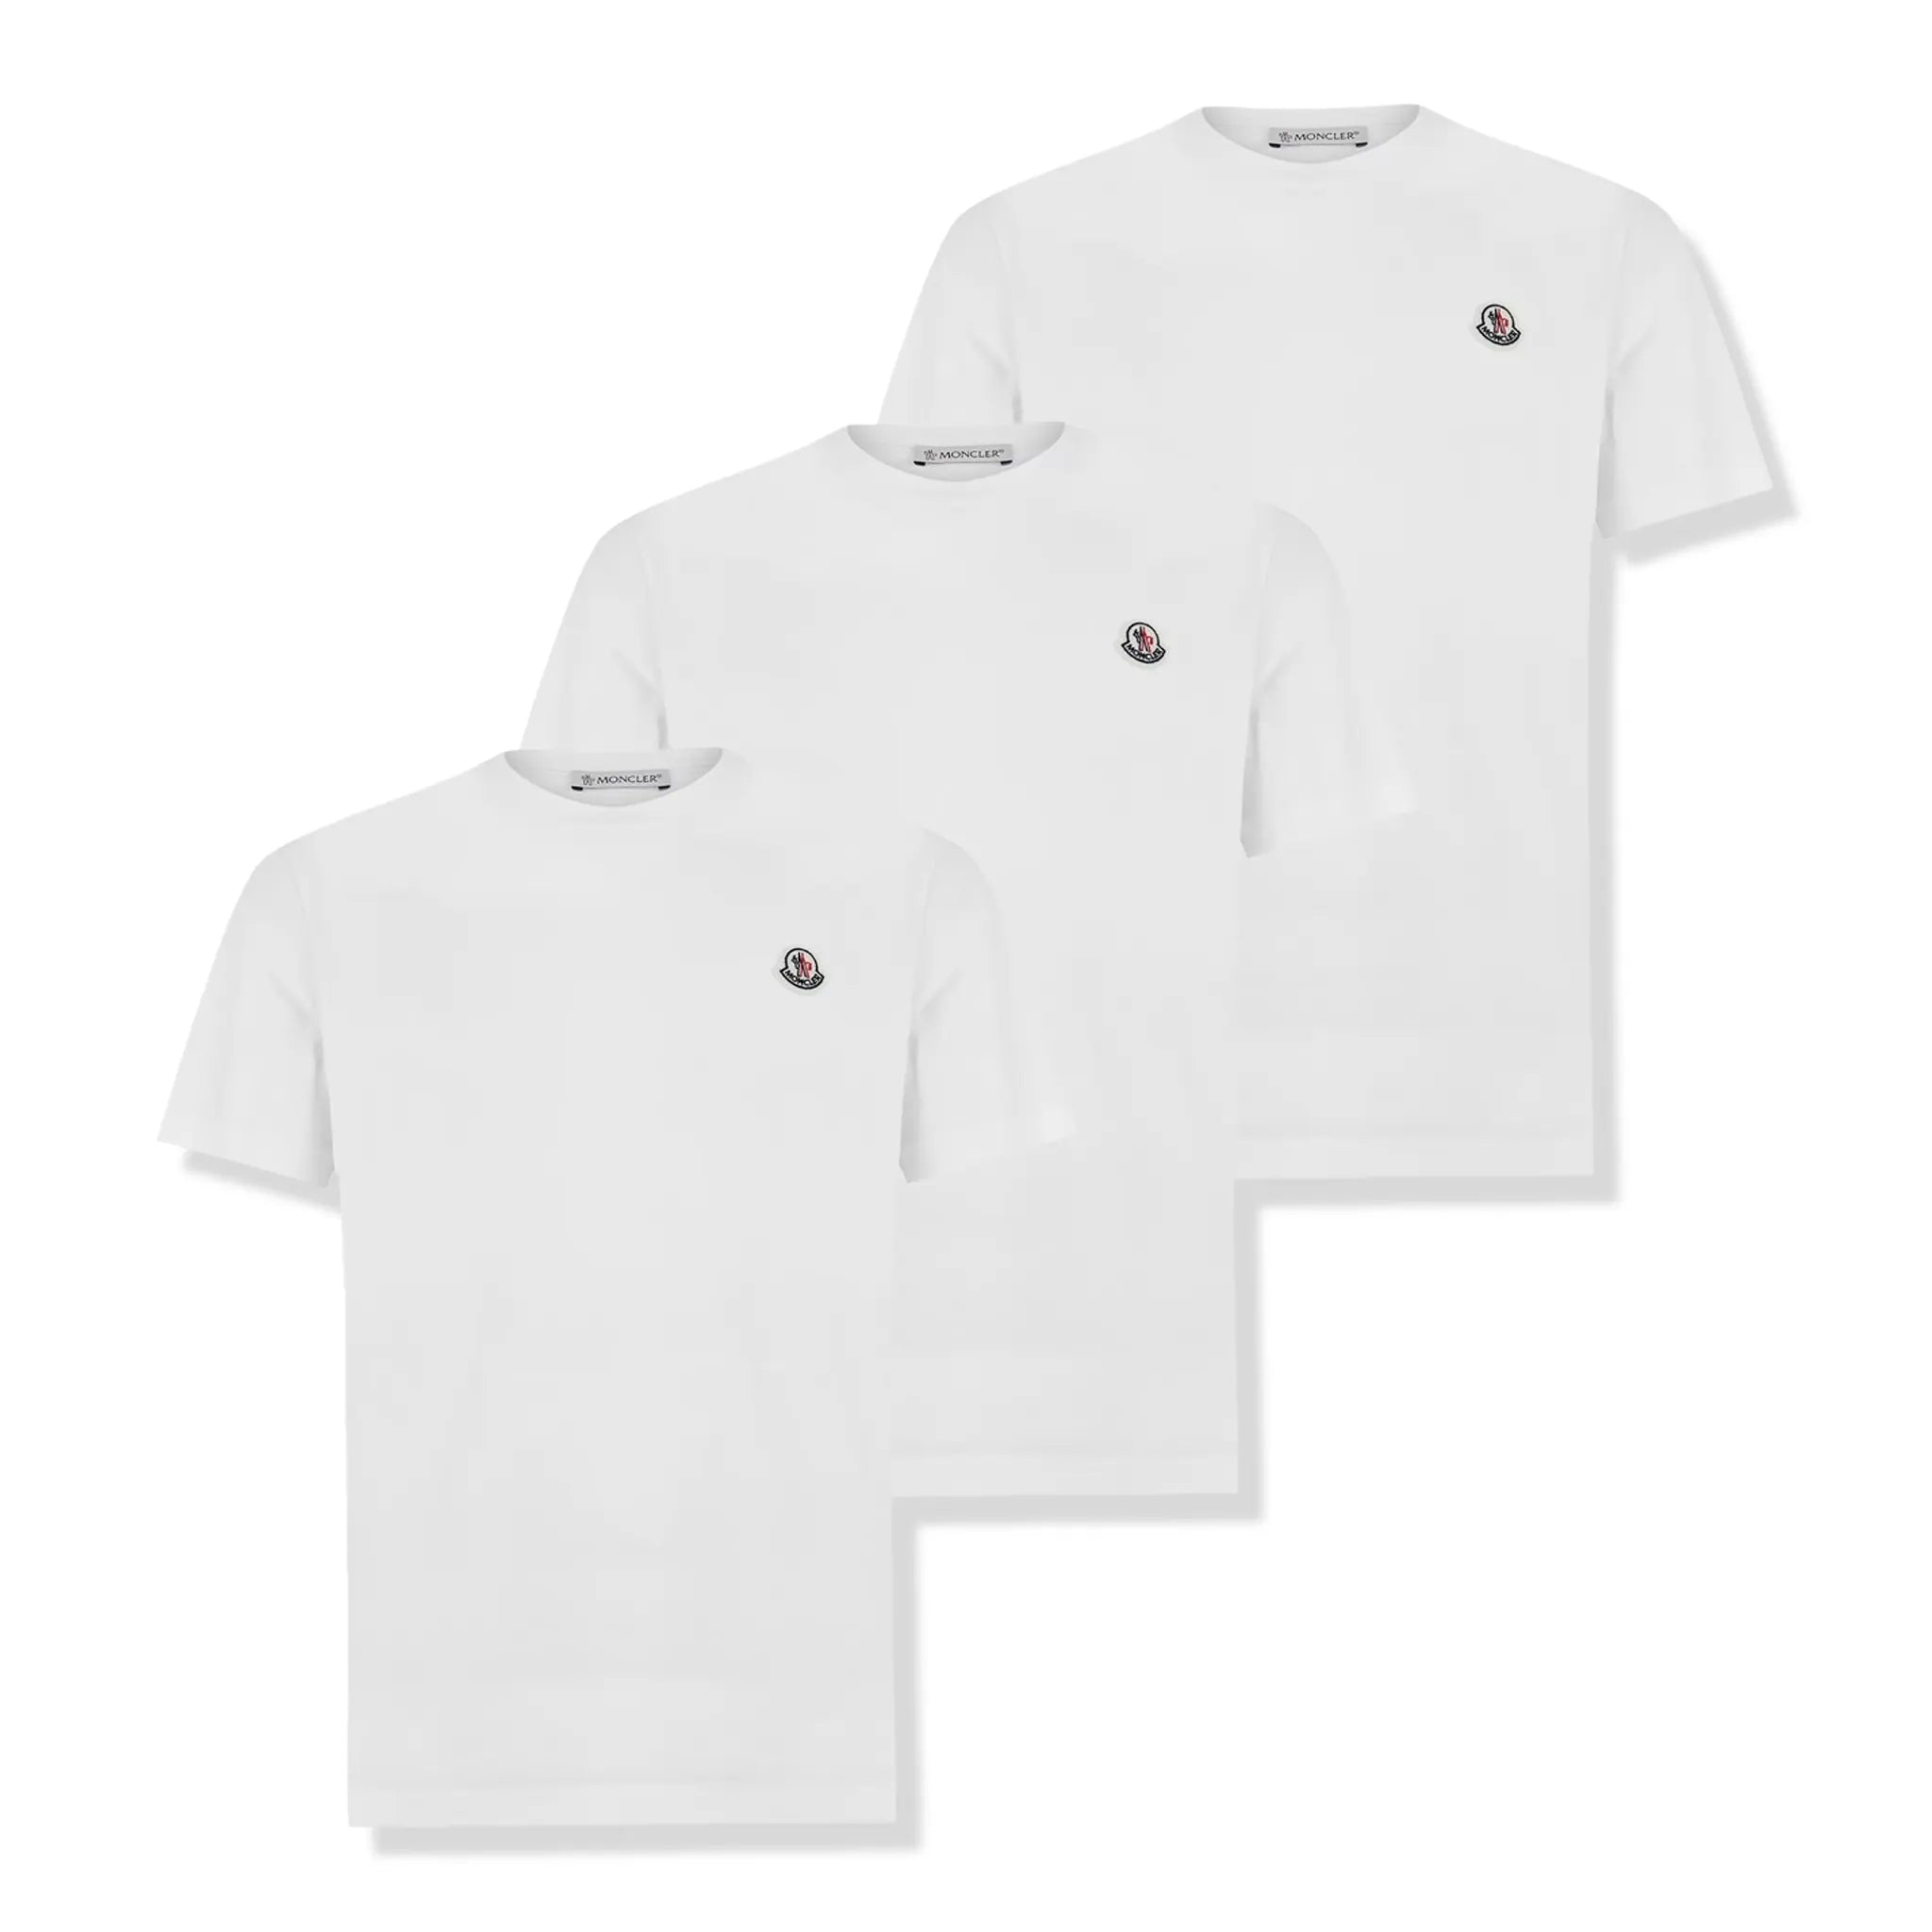 3 Pack view of Moncler SN00 3 pack White T Shirt J10918C00025829H8